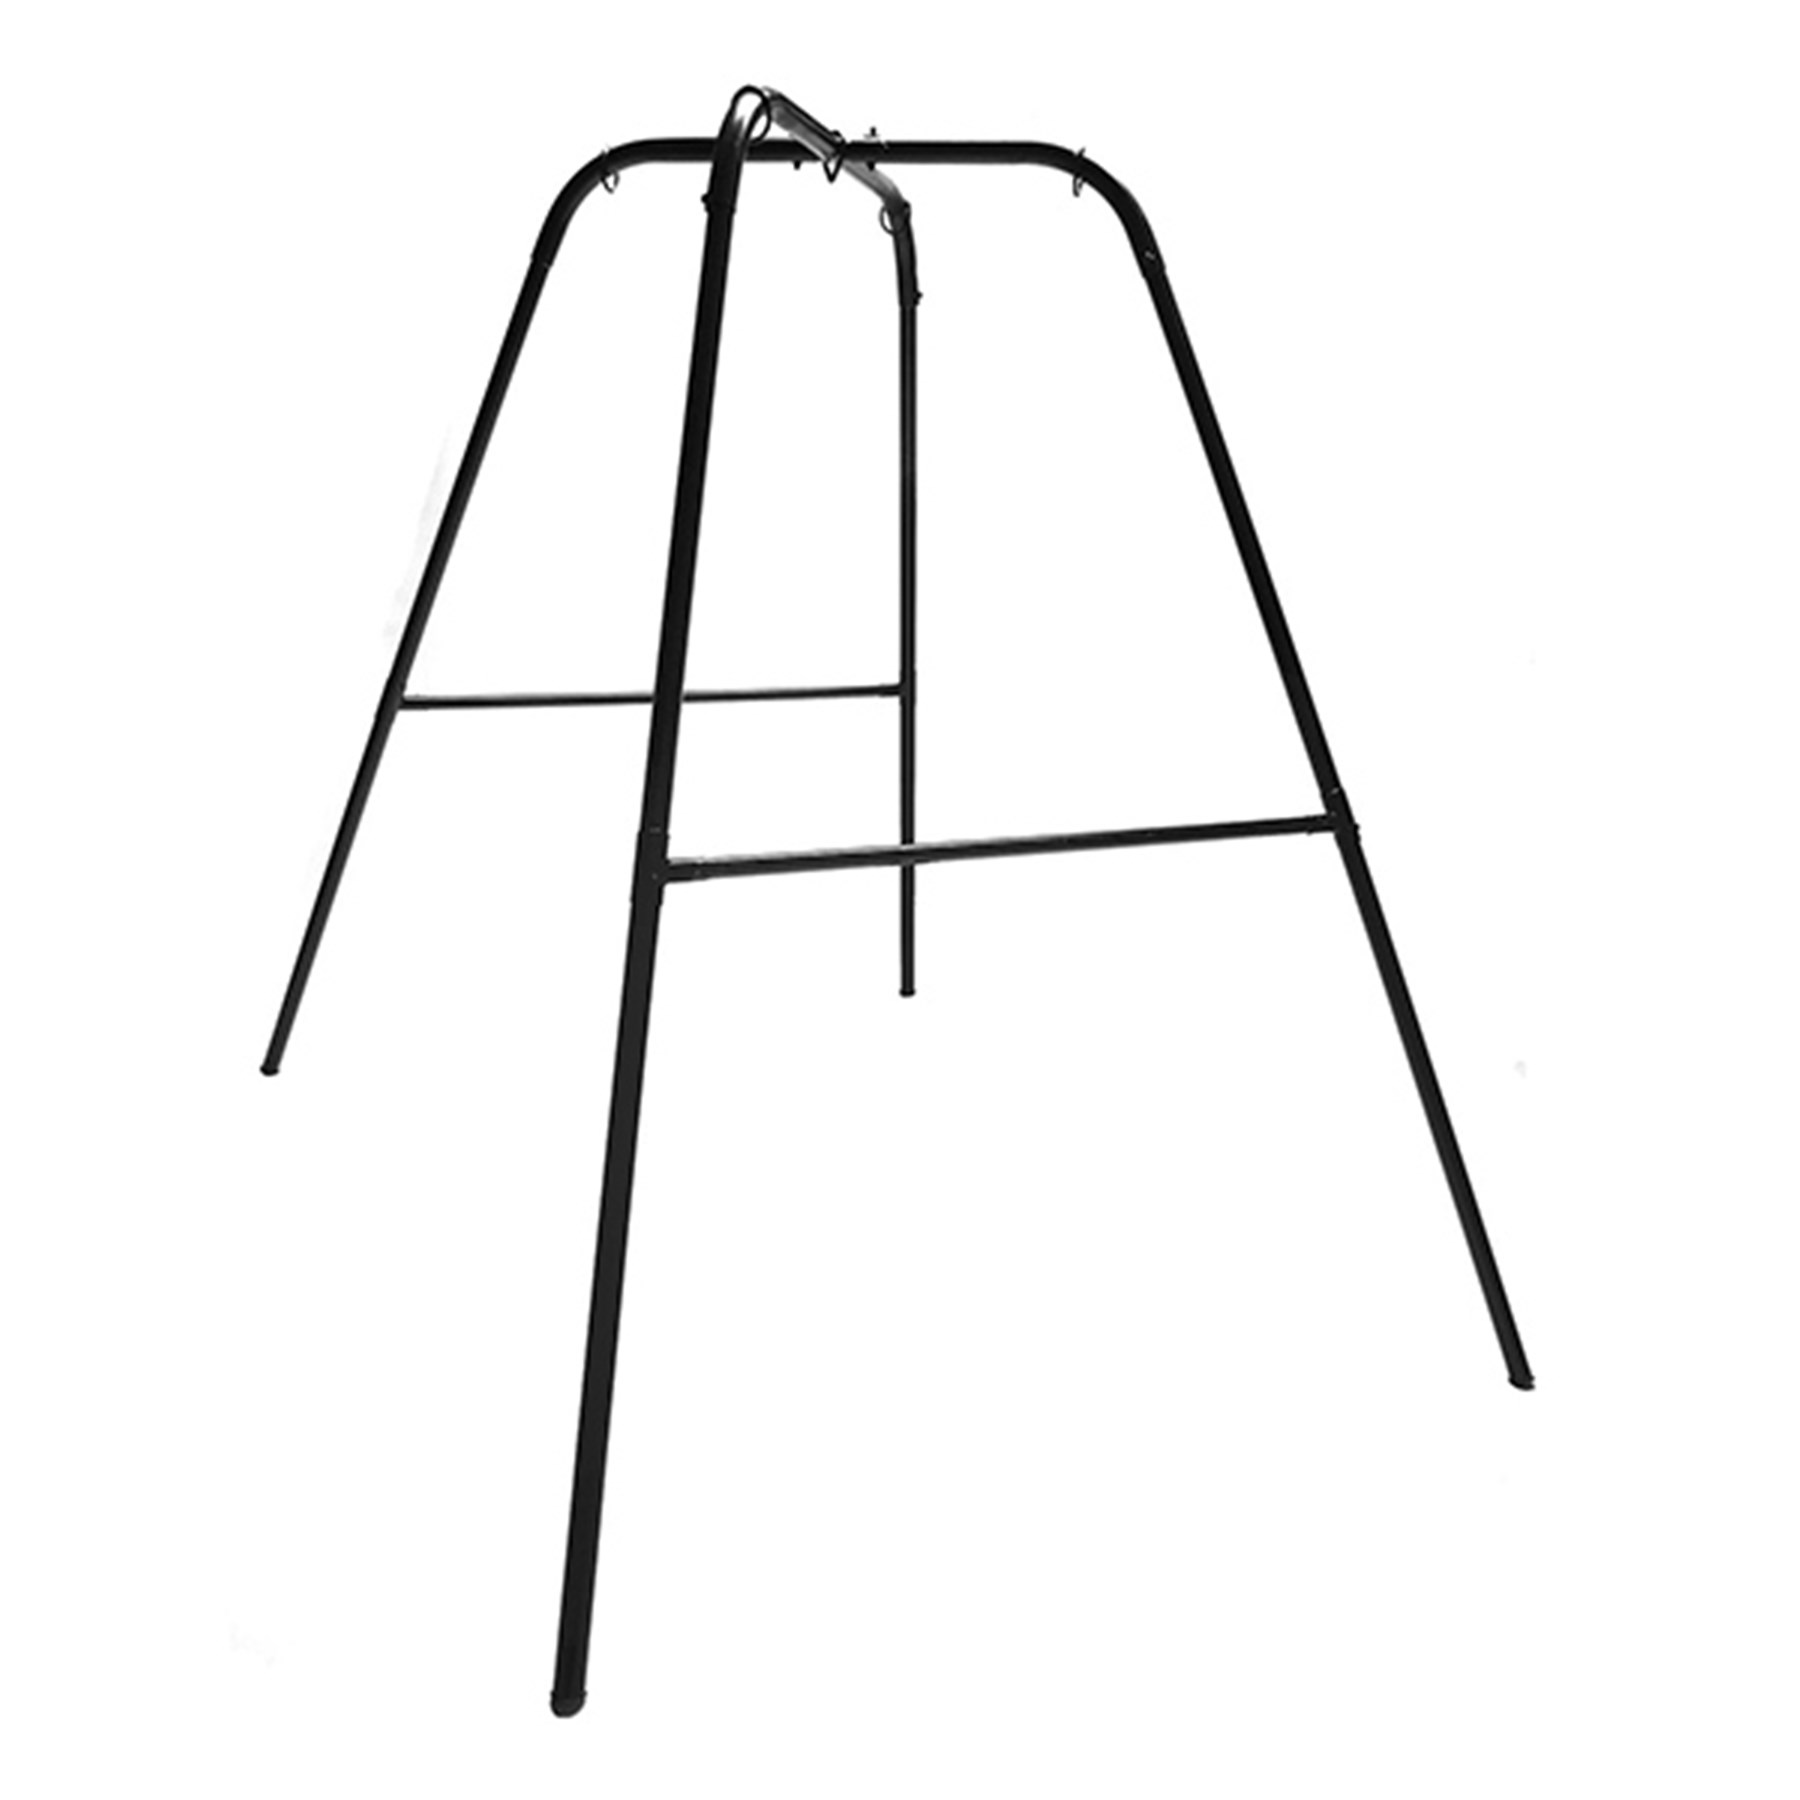 Trinity Ultimate Swing Stand without swing attached